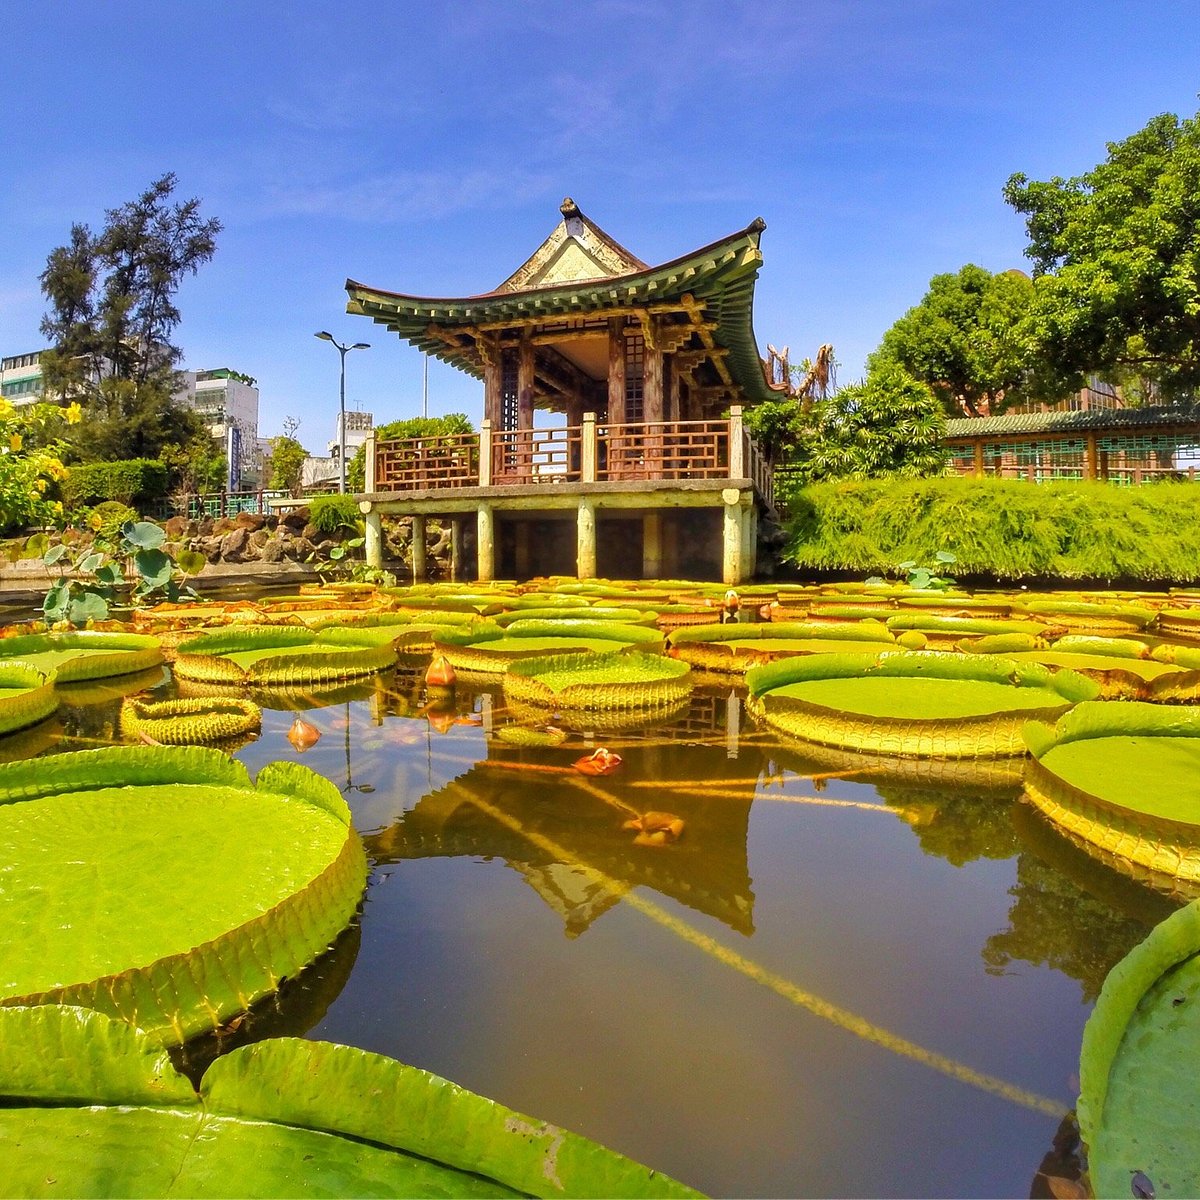 You Can Actually Sit on Giant Lily Pads in This Taipei Park